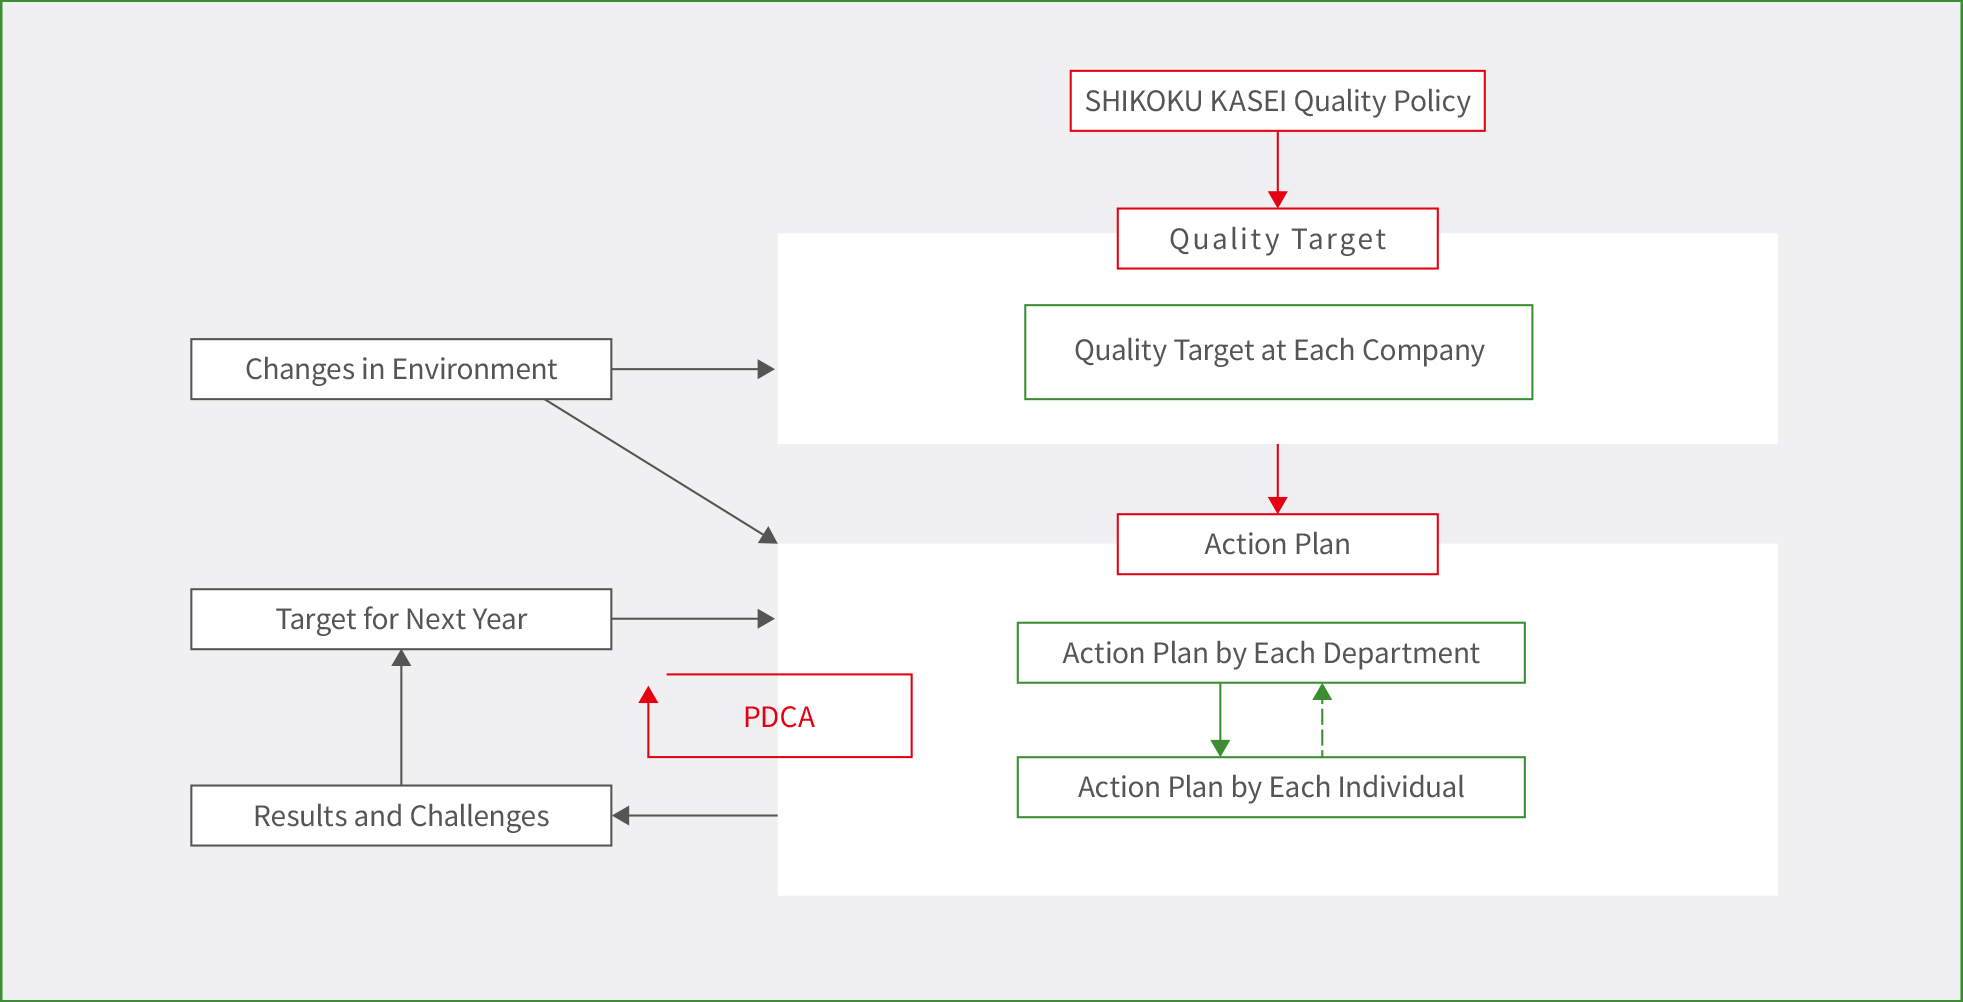 System Diagram Based on the Policy